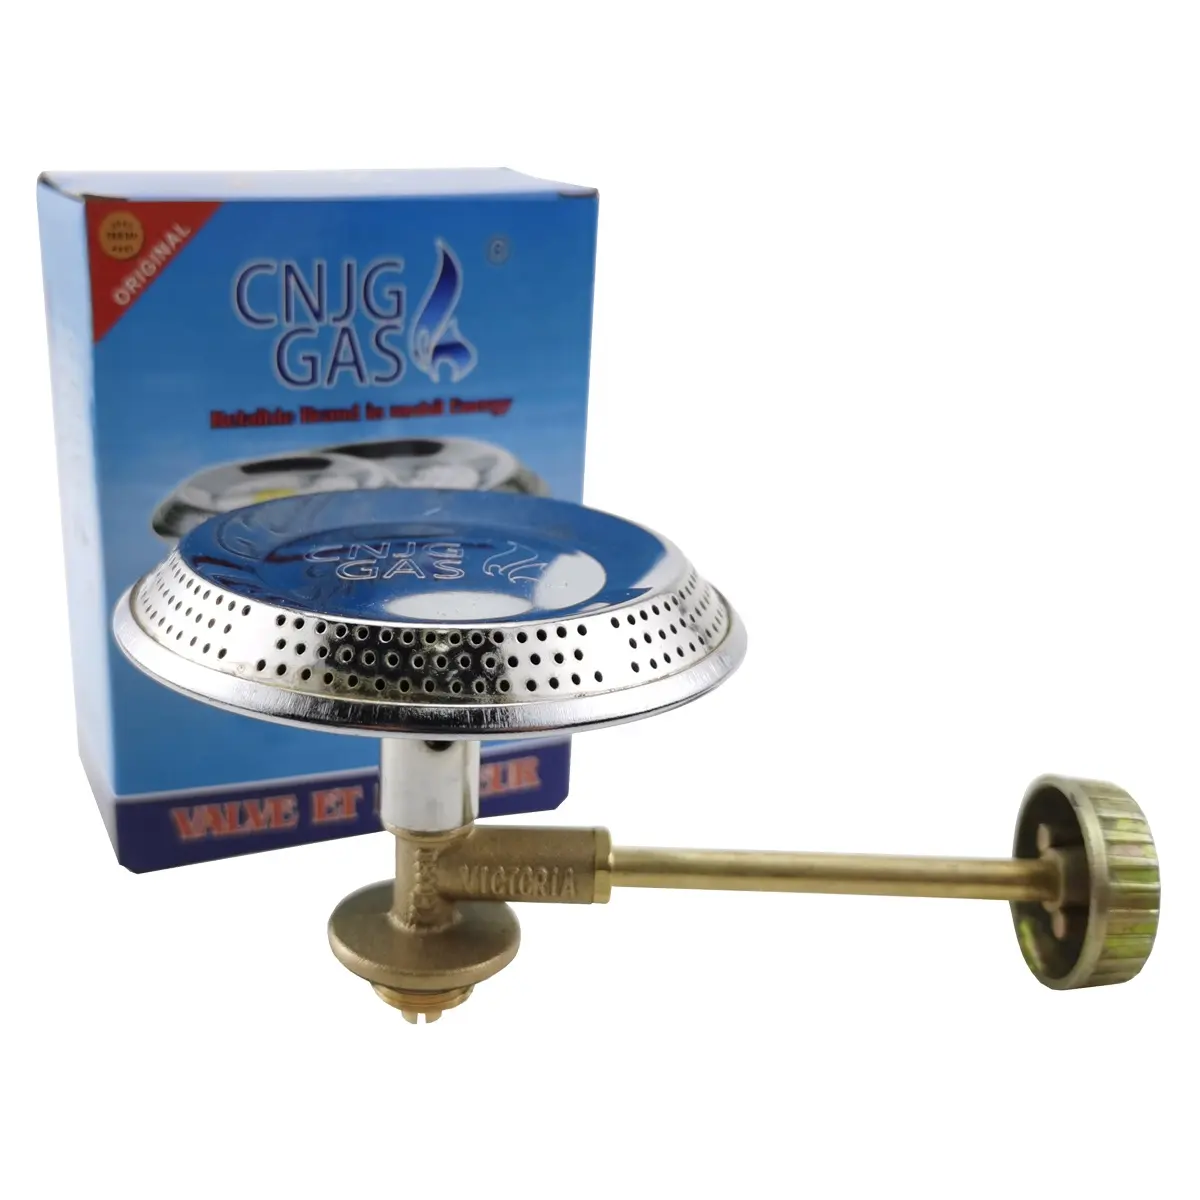 CNJG Small Gas Cooking Single Burners Portable Propane Camping Stove Burner Heads with Brass Control for 6KG Cylinder